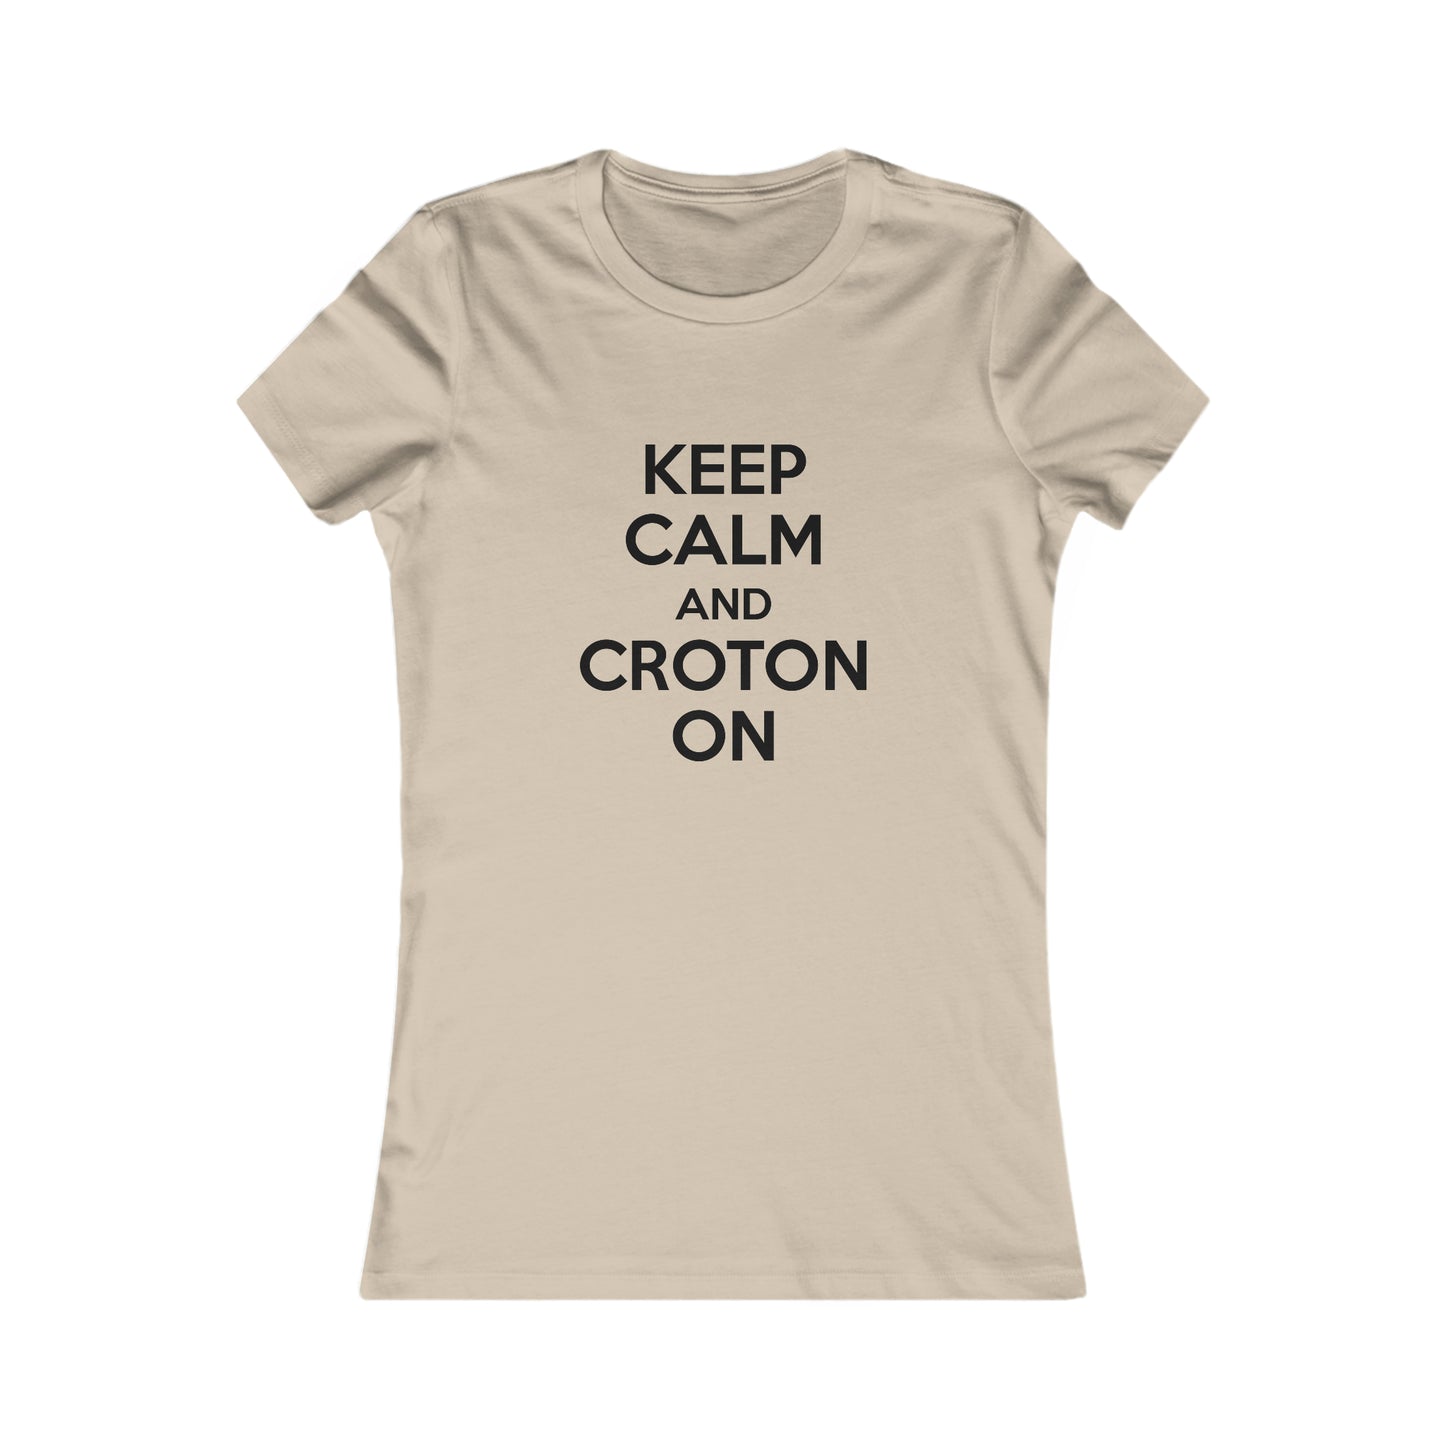 Women's Fitted Keep Calm and Croton ON Tee (White/Light Colors)